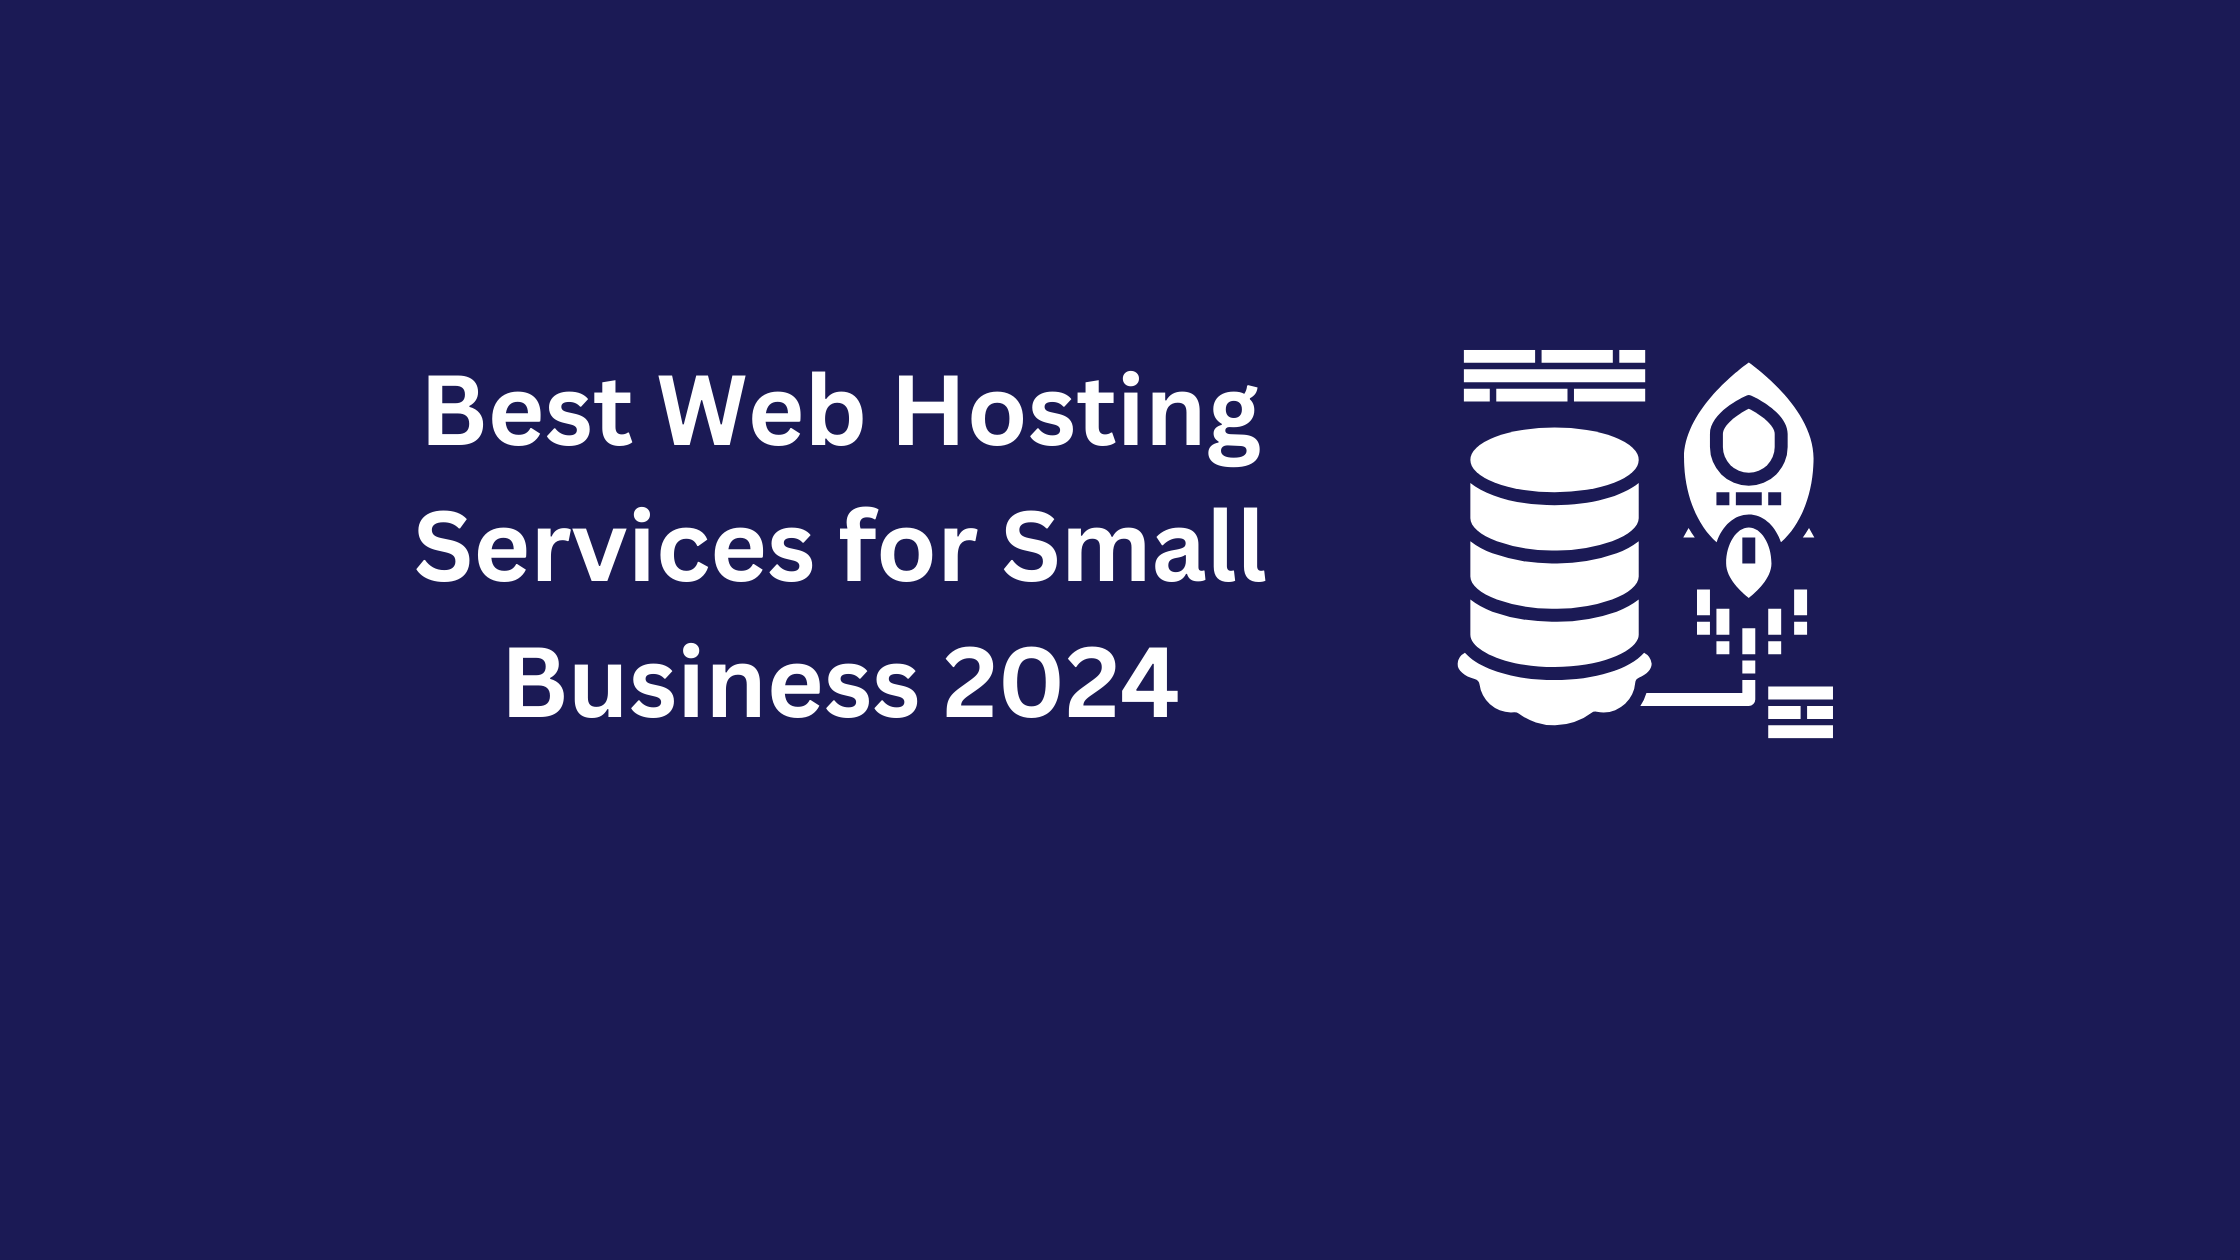 Best Web Hosting Services for Small Business 2024